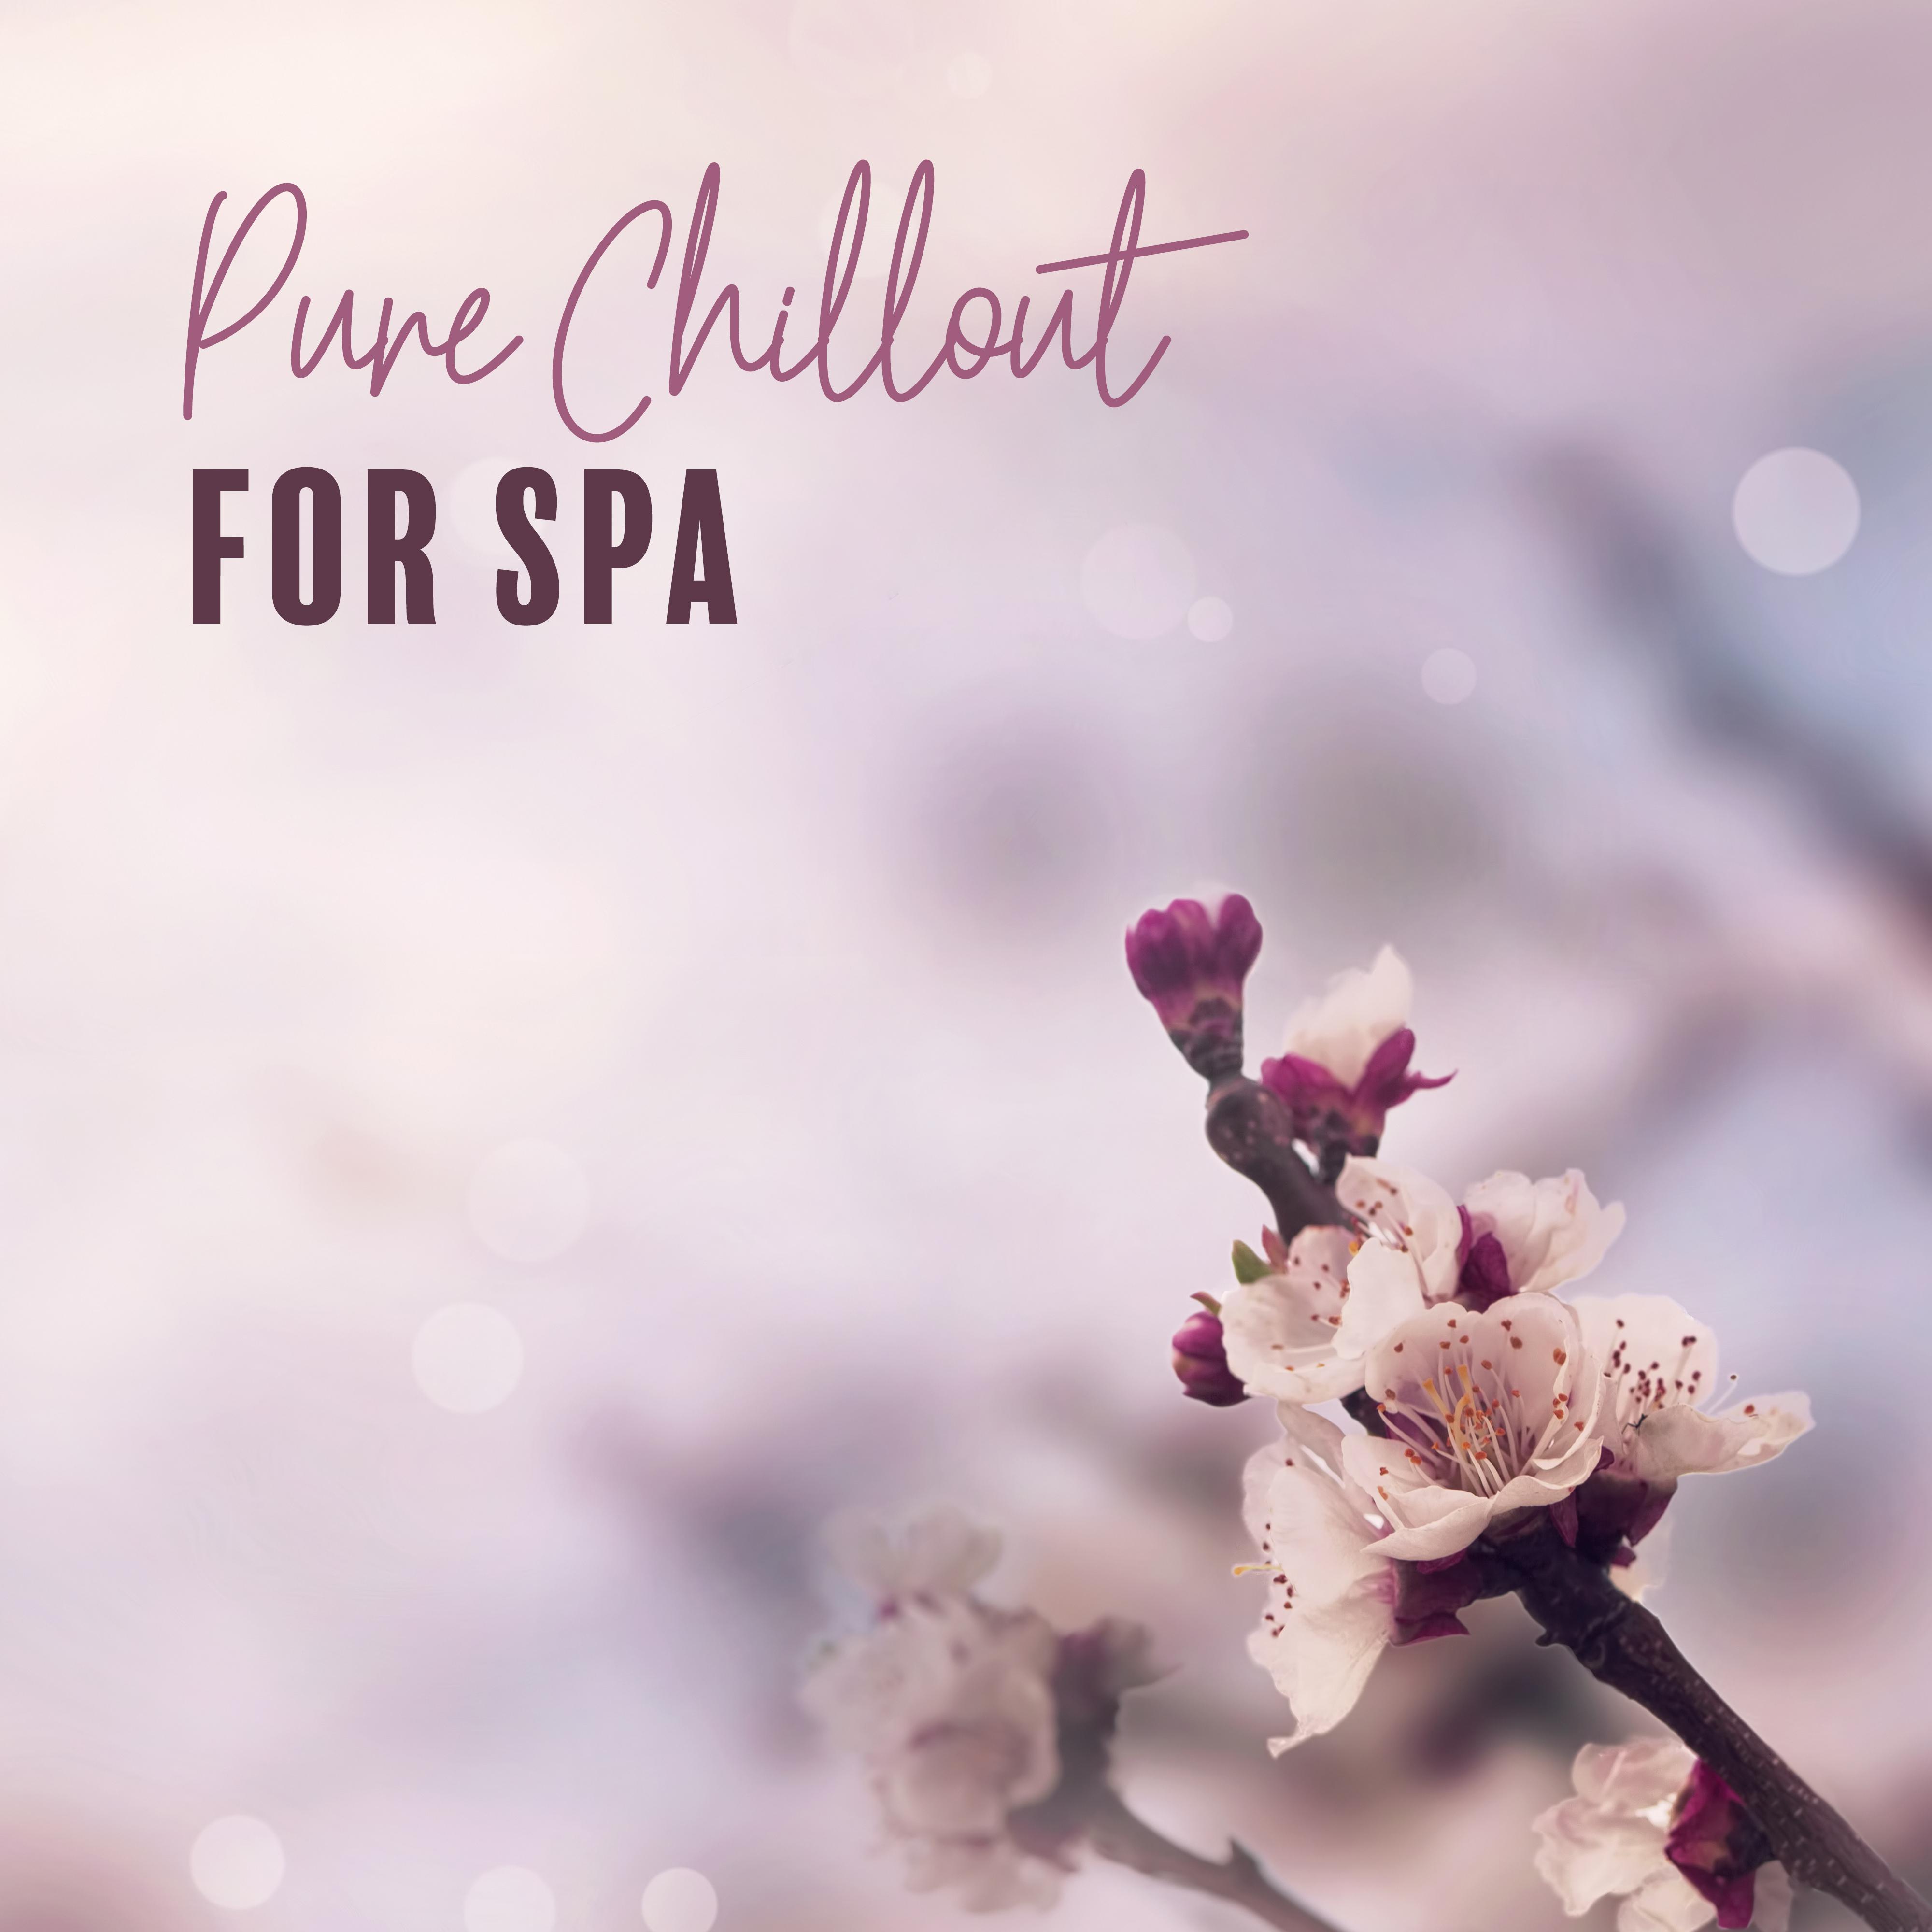 Pure Chillout for Spa: Ambient Music, Deep Relaxation, Massage Music, Lounge, Deep Harmony, Relaxation Music